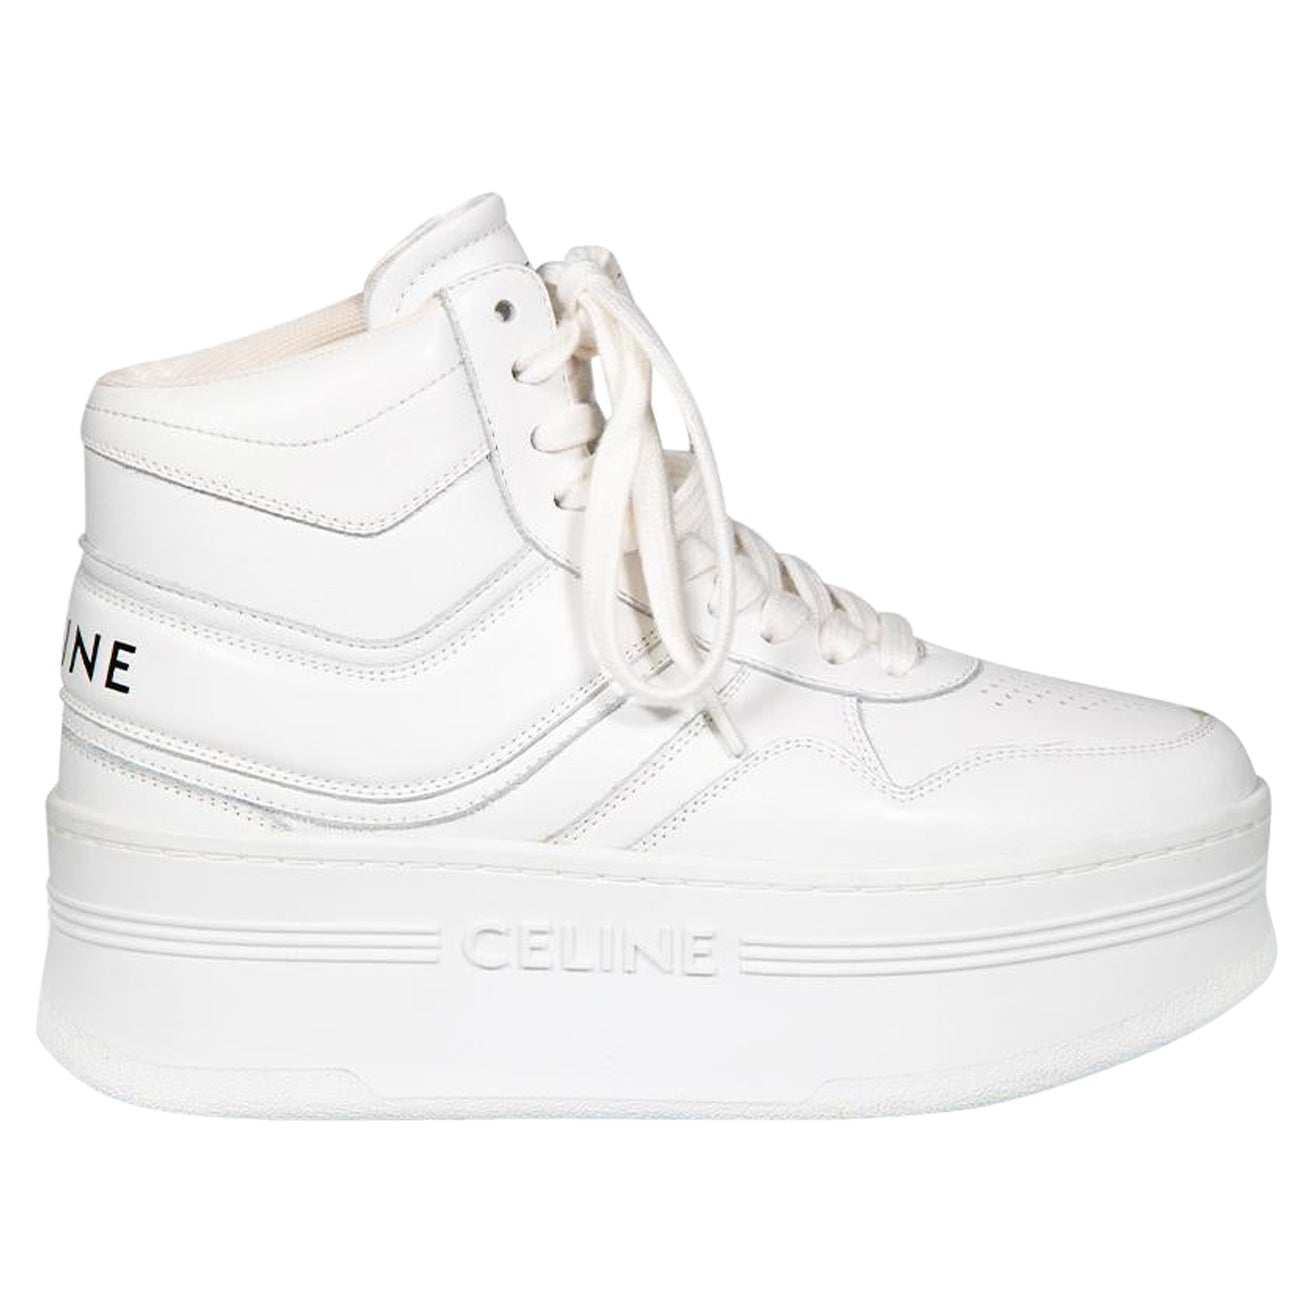 Céline White Leather High Top Platform Trainers Size IT 35 For Sale